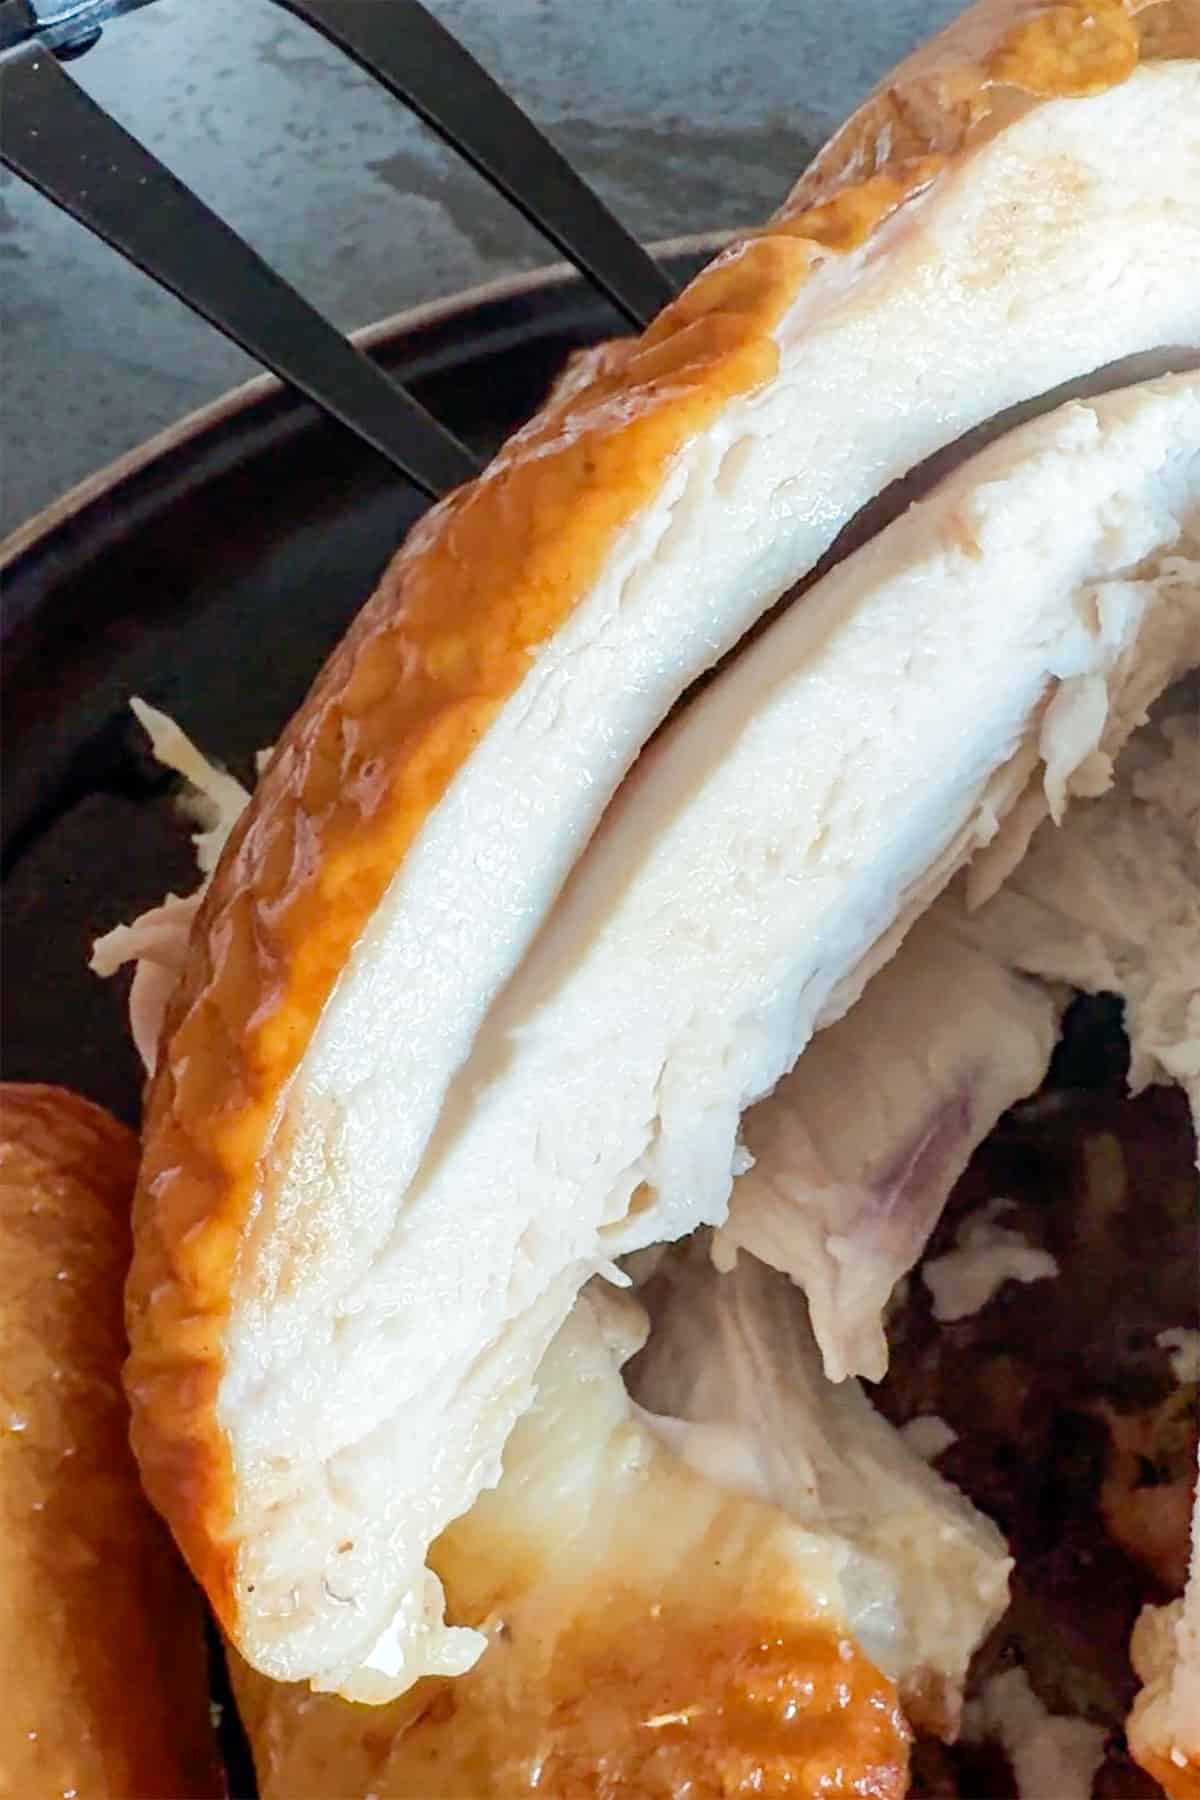 Sliced chicken breast from whole chicken smoked on indoor smoker.